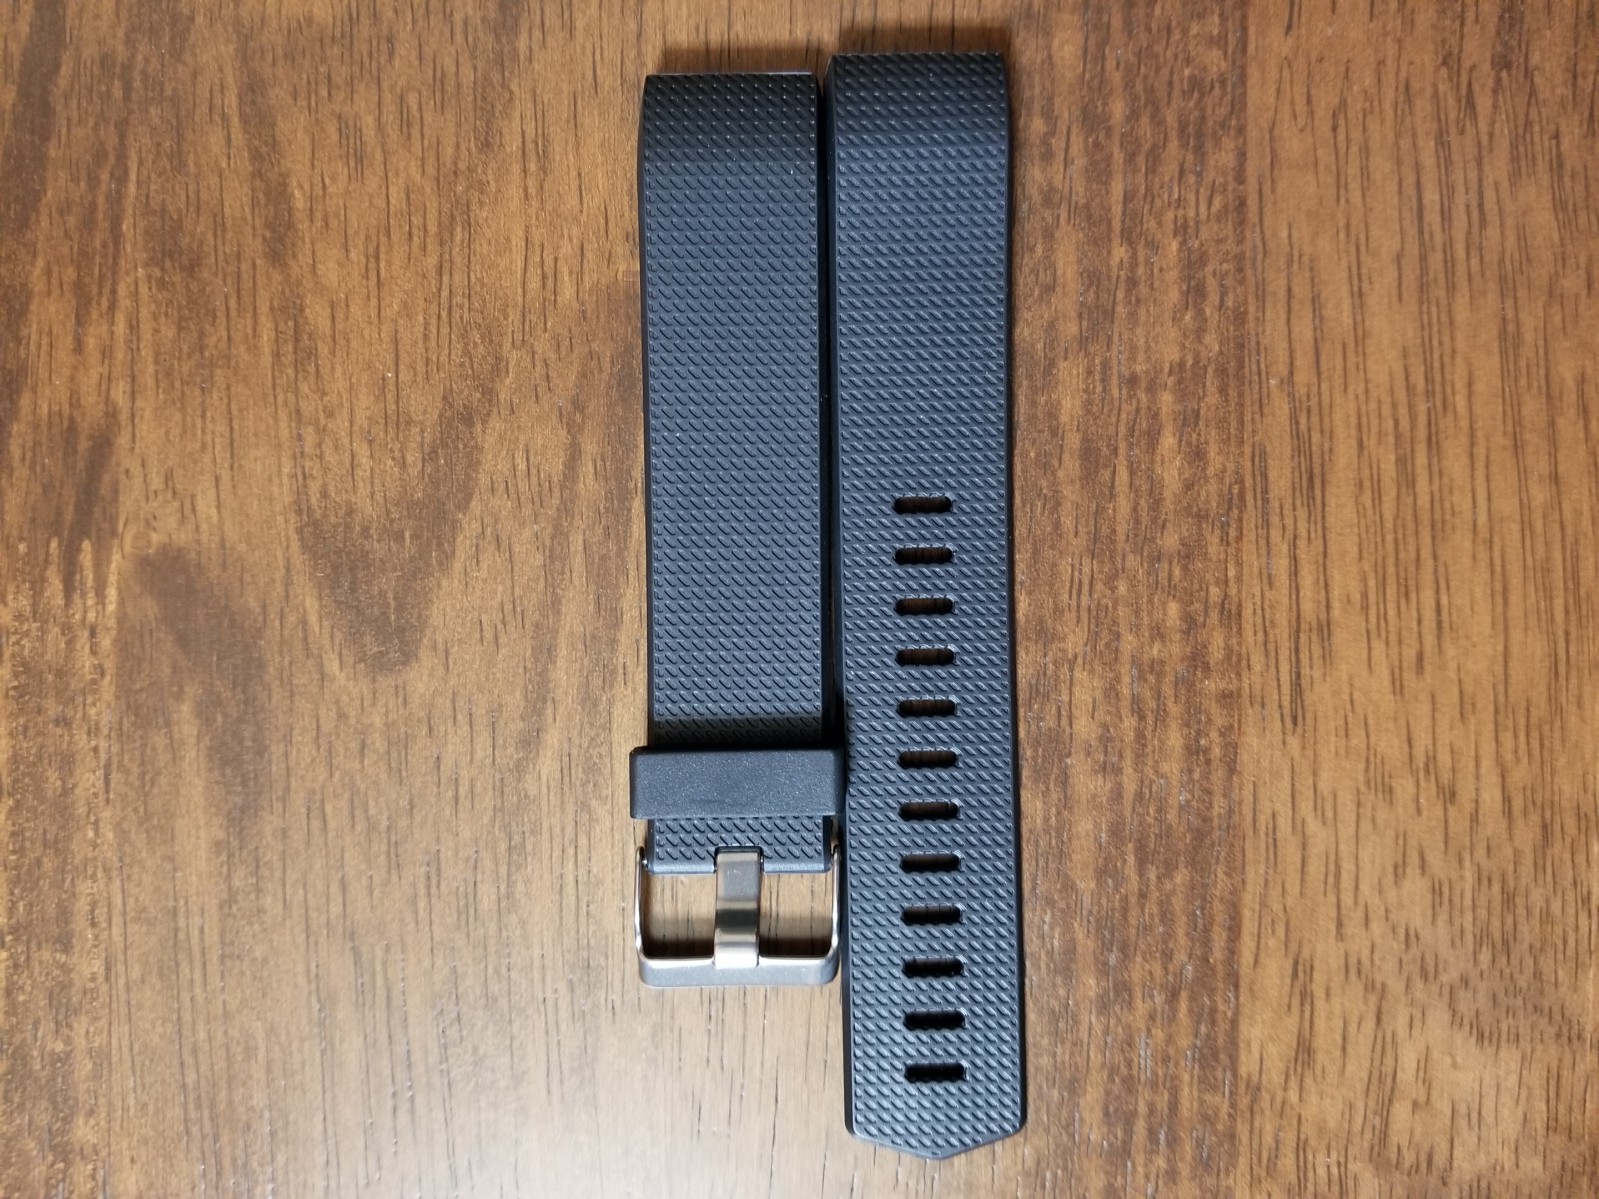 Vancle バンド for Fitbit Charge 2」を再度購入 – 南の田舎の一室から